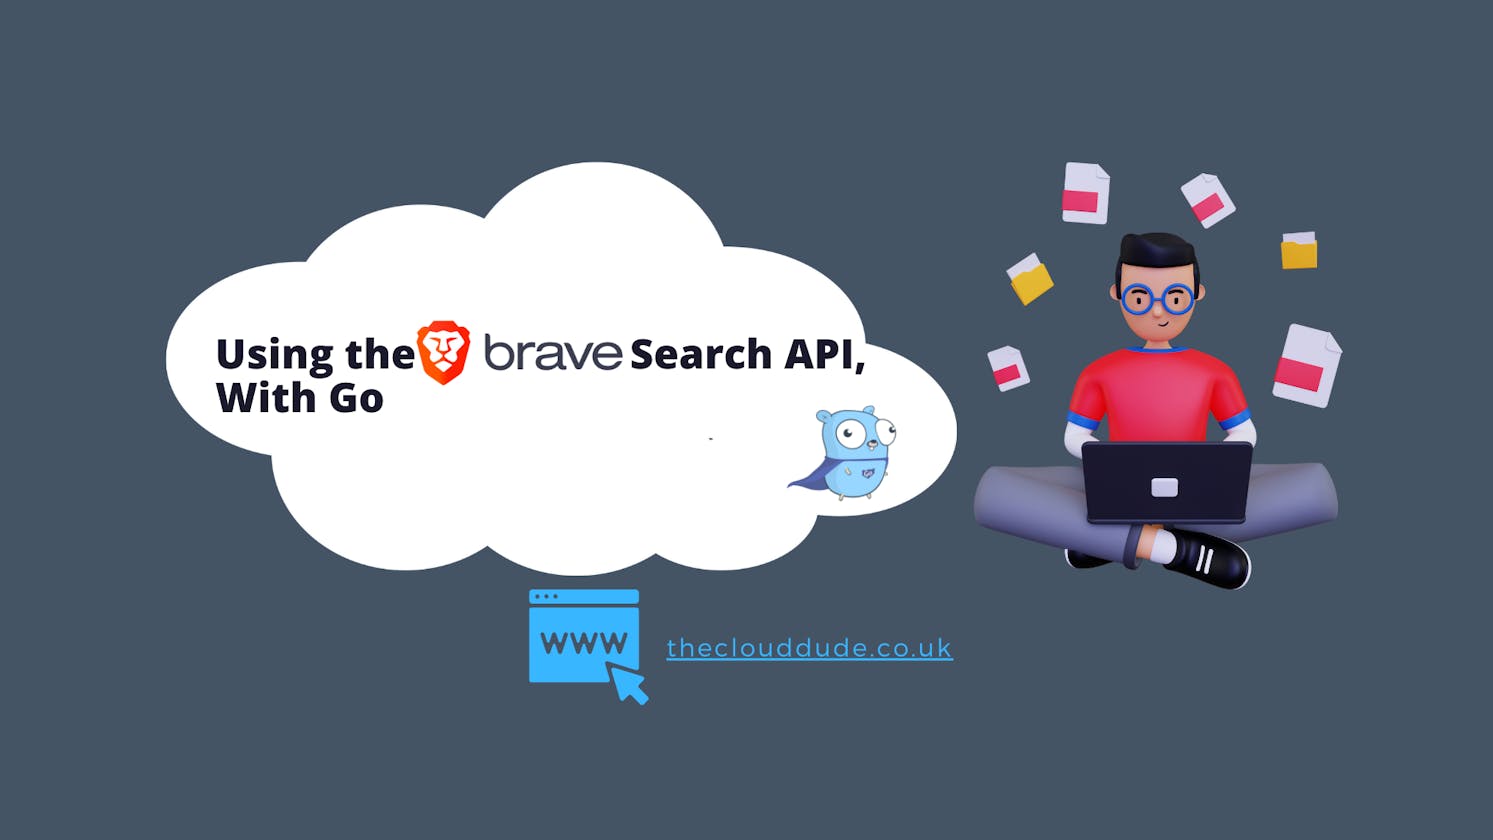 Using the Brave Search API with Go